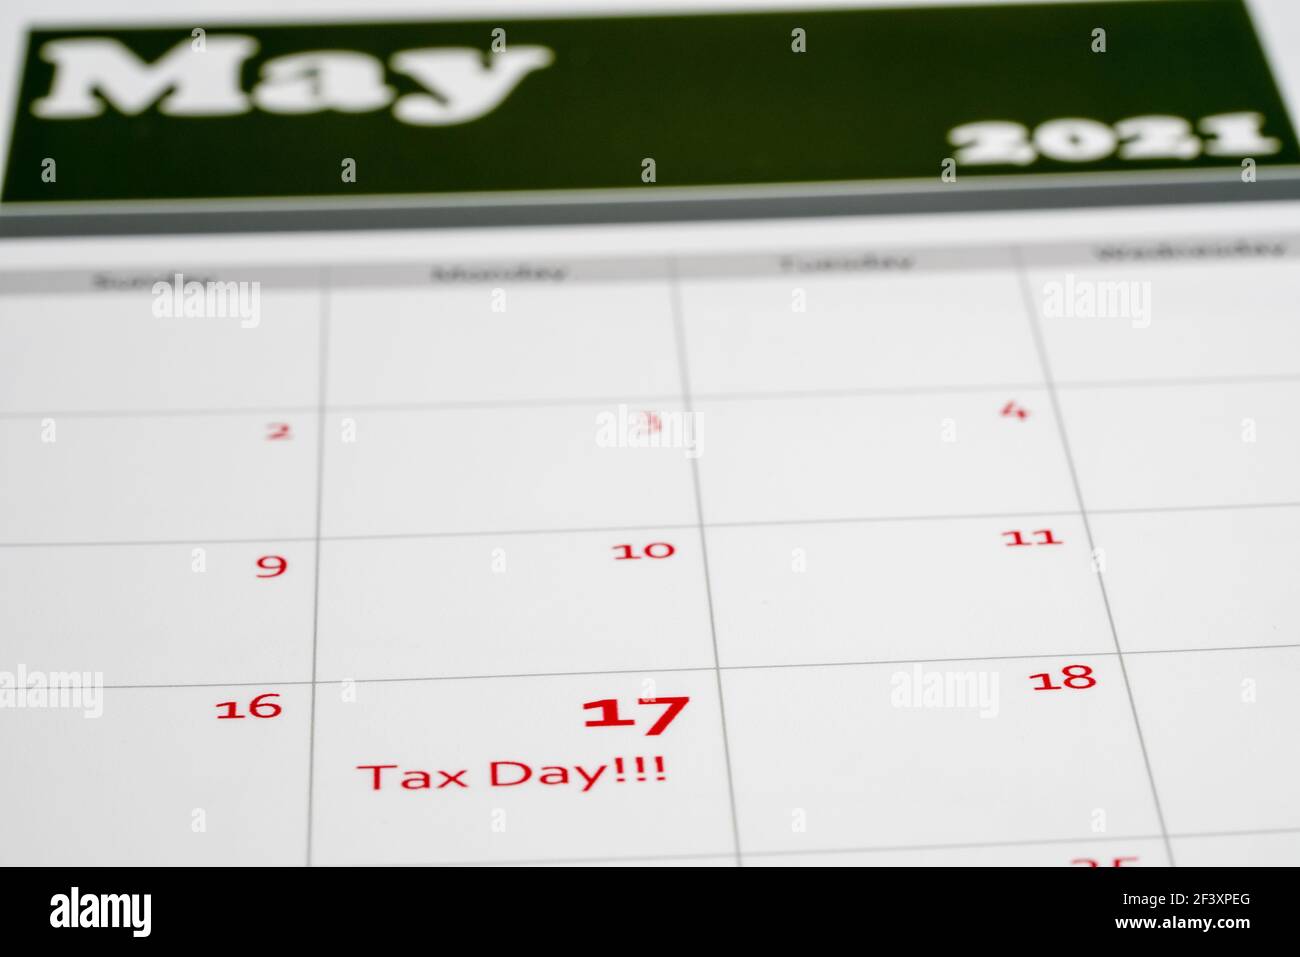 Calendar with Tax Day note inserted in the date for May 17 to illustrate the new tax return filing date of 17th May 2021. Stock Photo